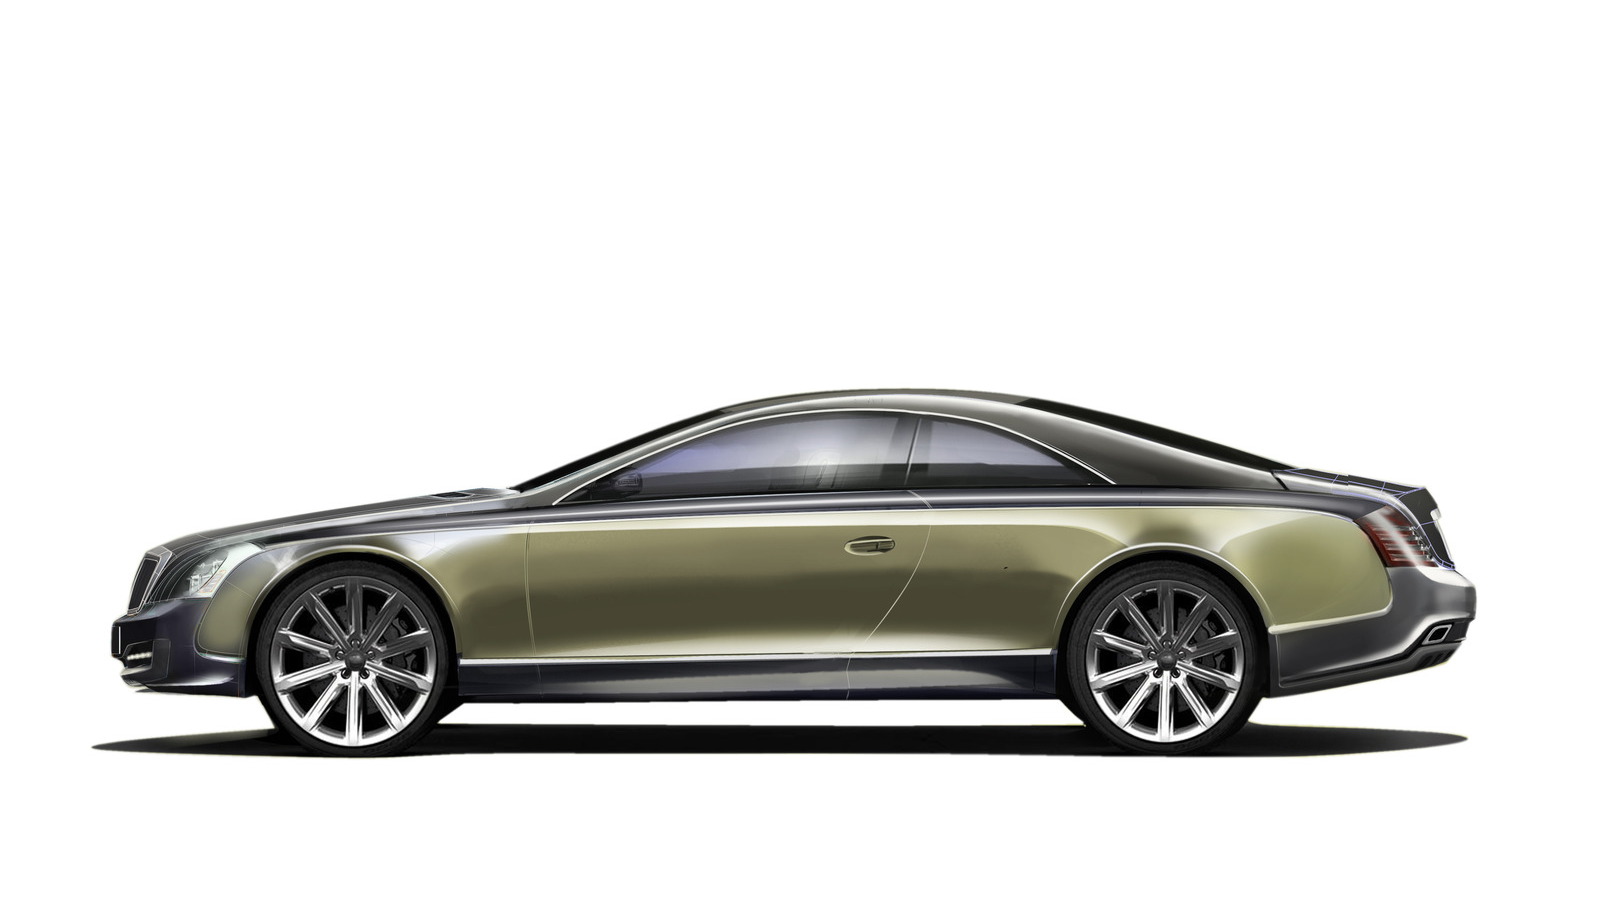 XENATEC Coupe based on the Maybach 57S.